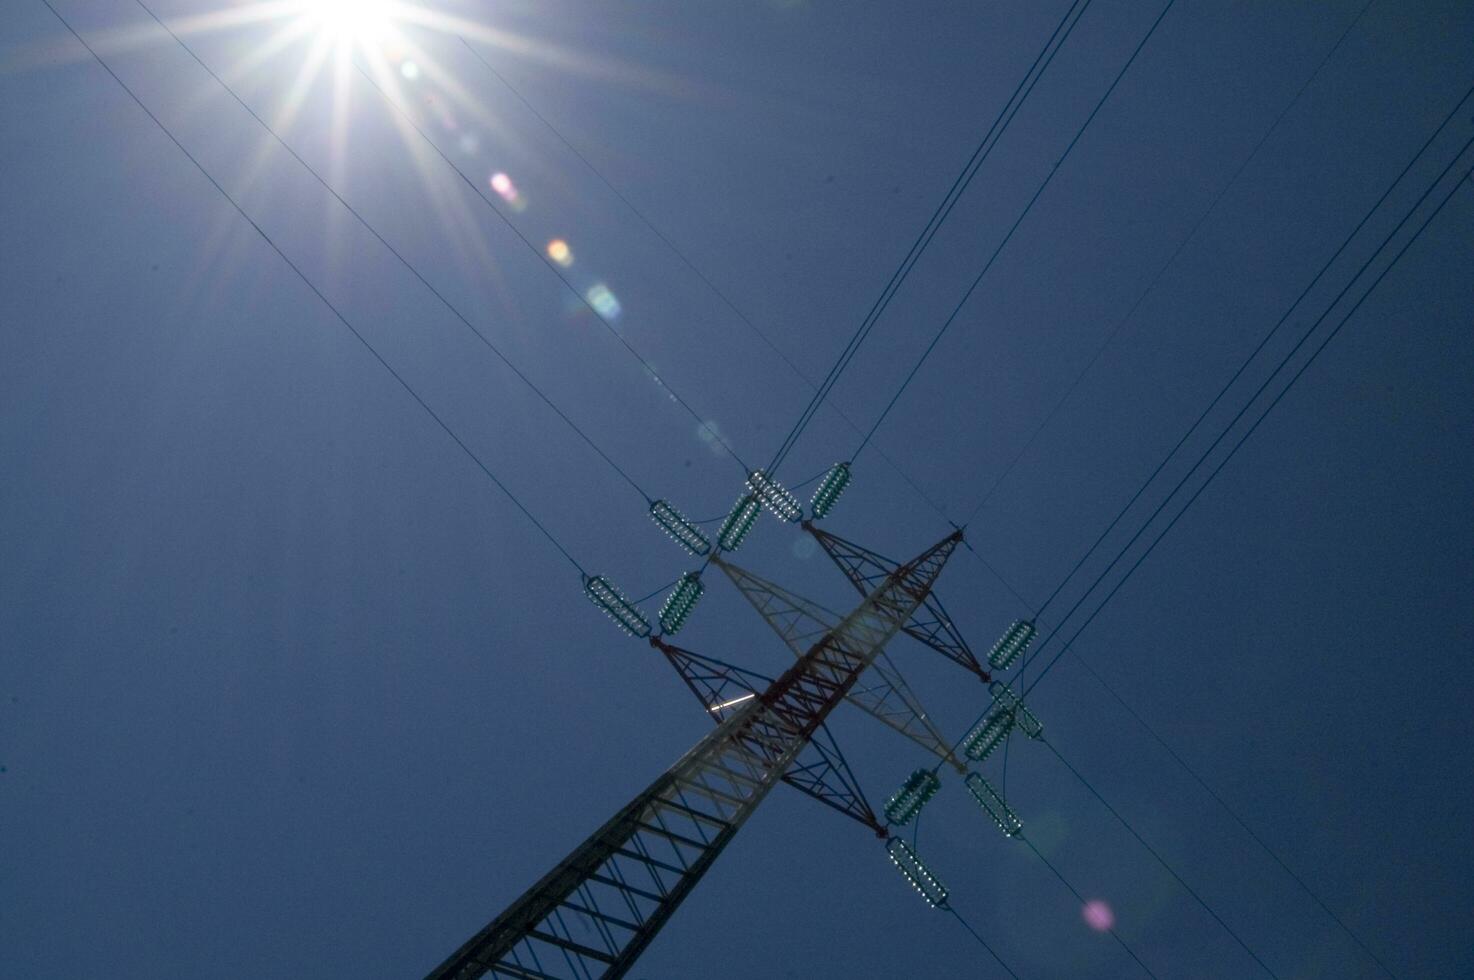 a high voltage power line with wires and poles photo